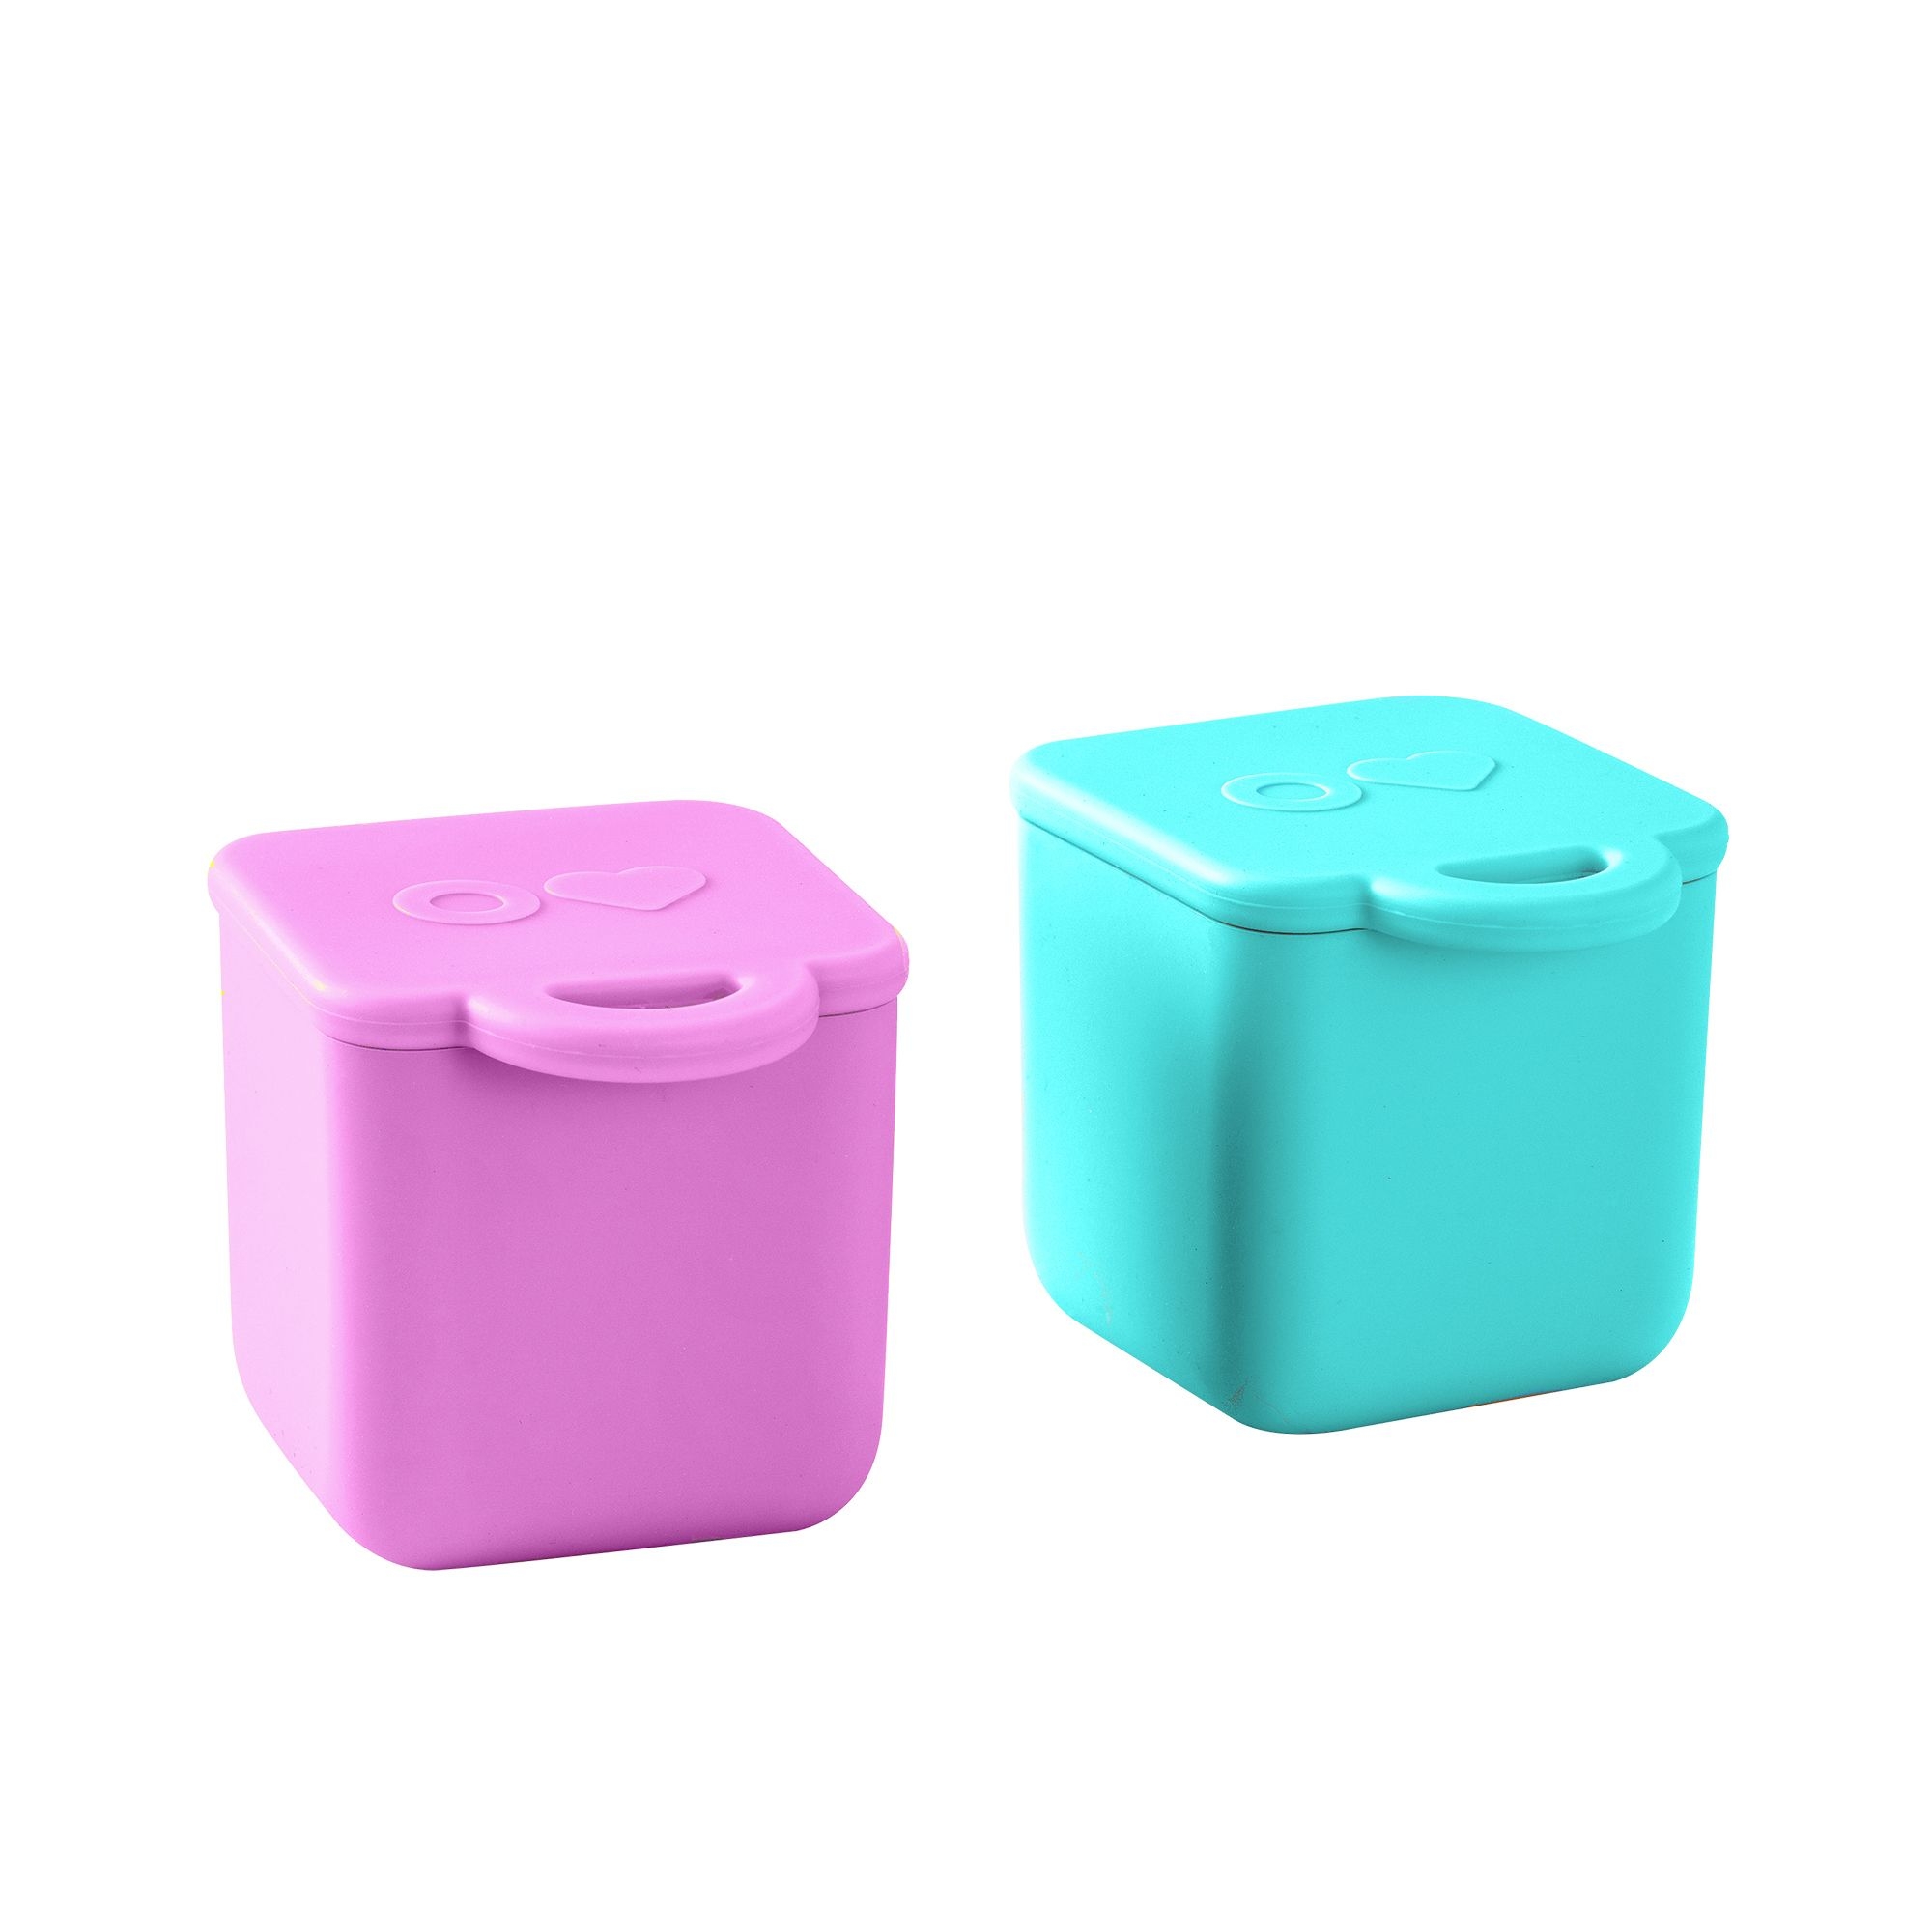 Omie OmieDip Silicone Dip Container Set of 2 Pink and Teal Image 1